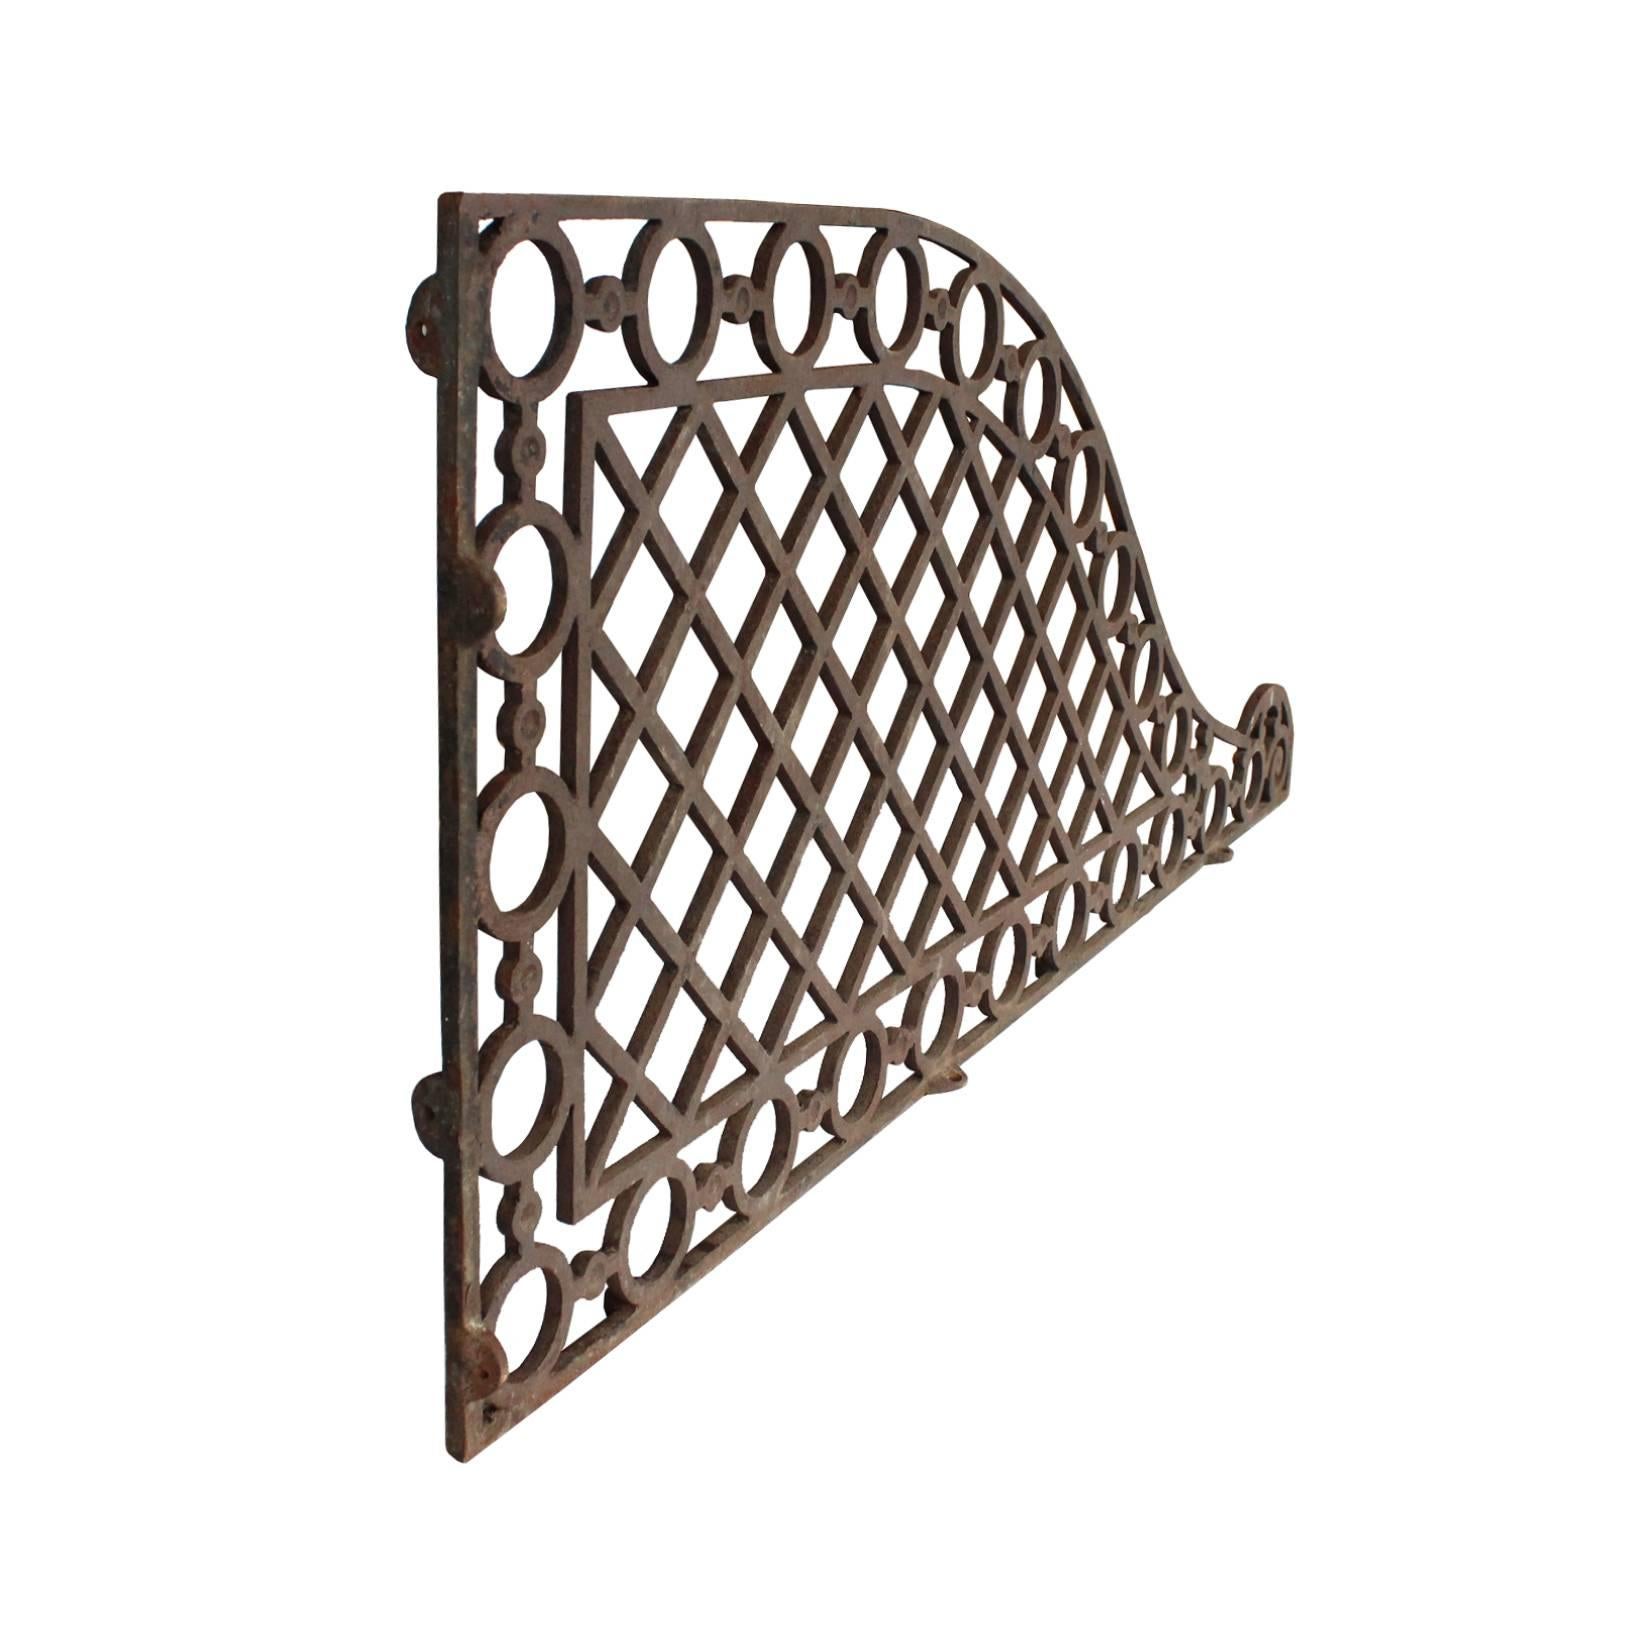 Salvaged from a firehouse in New England, these cast iron stall dividers would have graced a well dressed stable. Their primary function was to create a barrier between stalls whilst allowing light and air to flow through, though they also provide